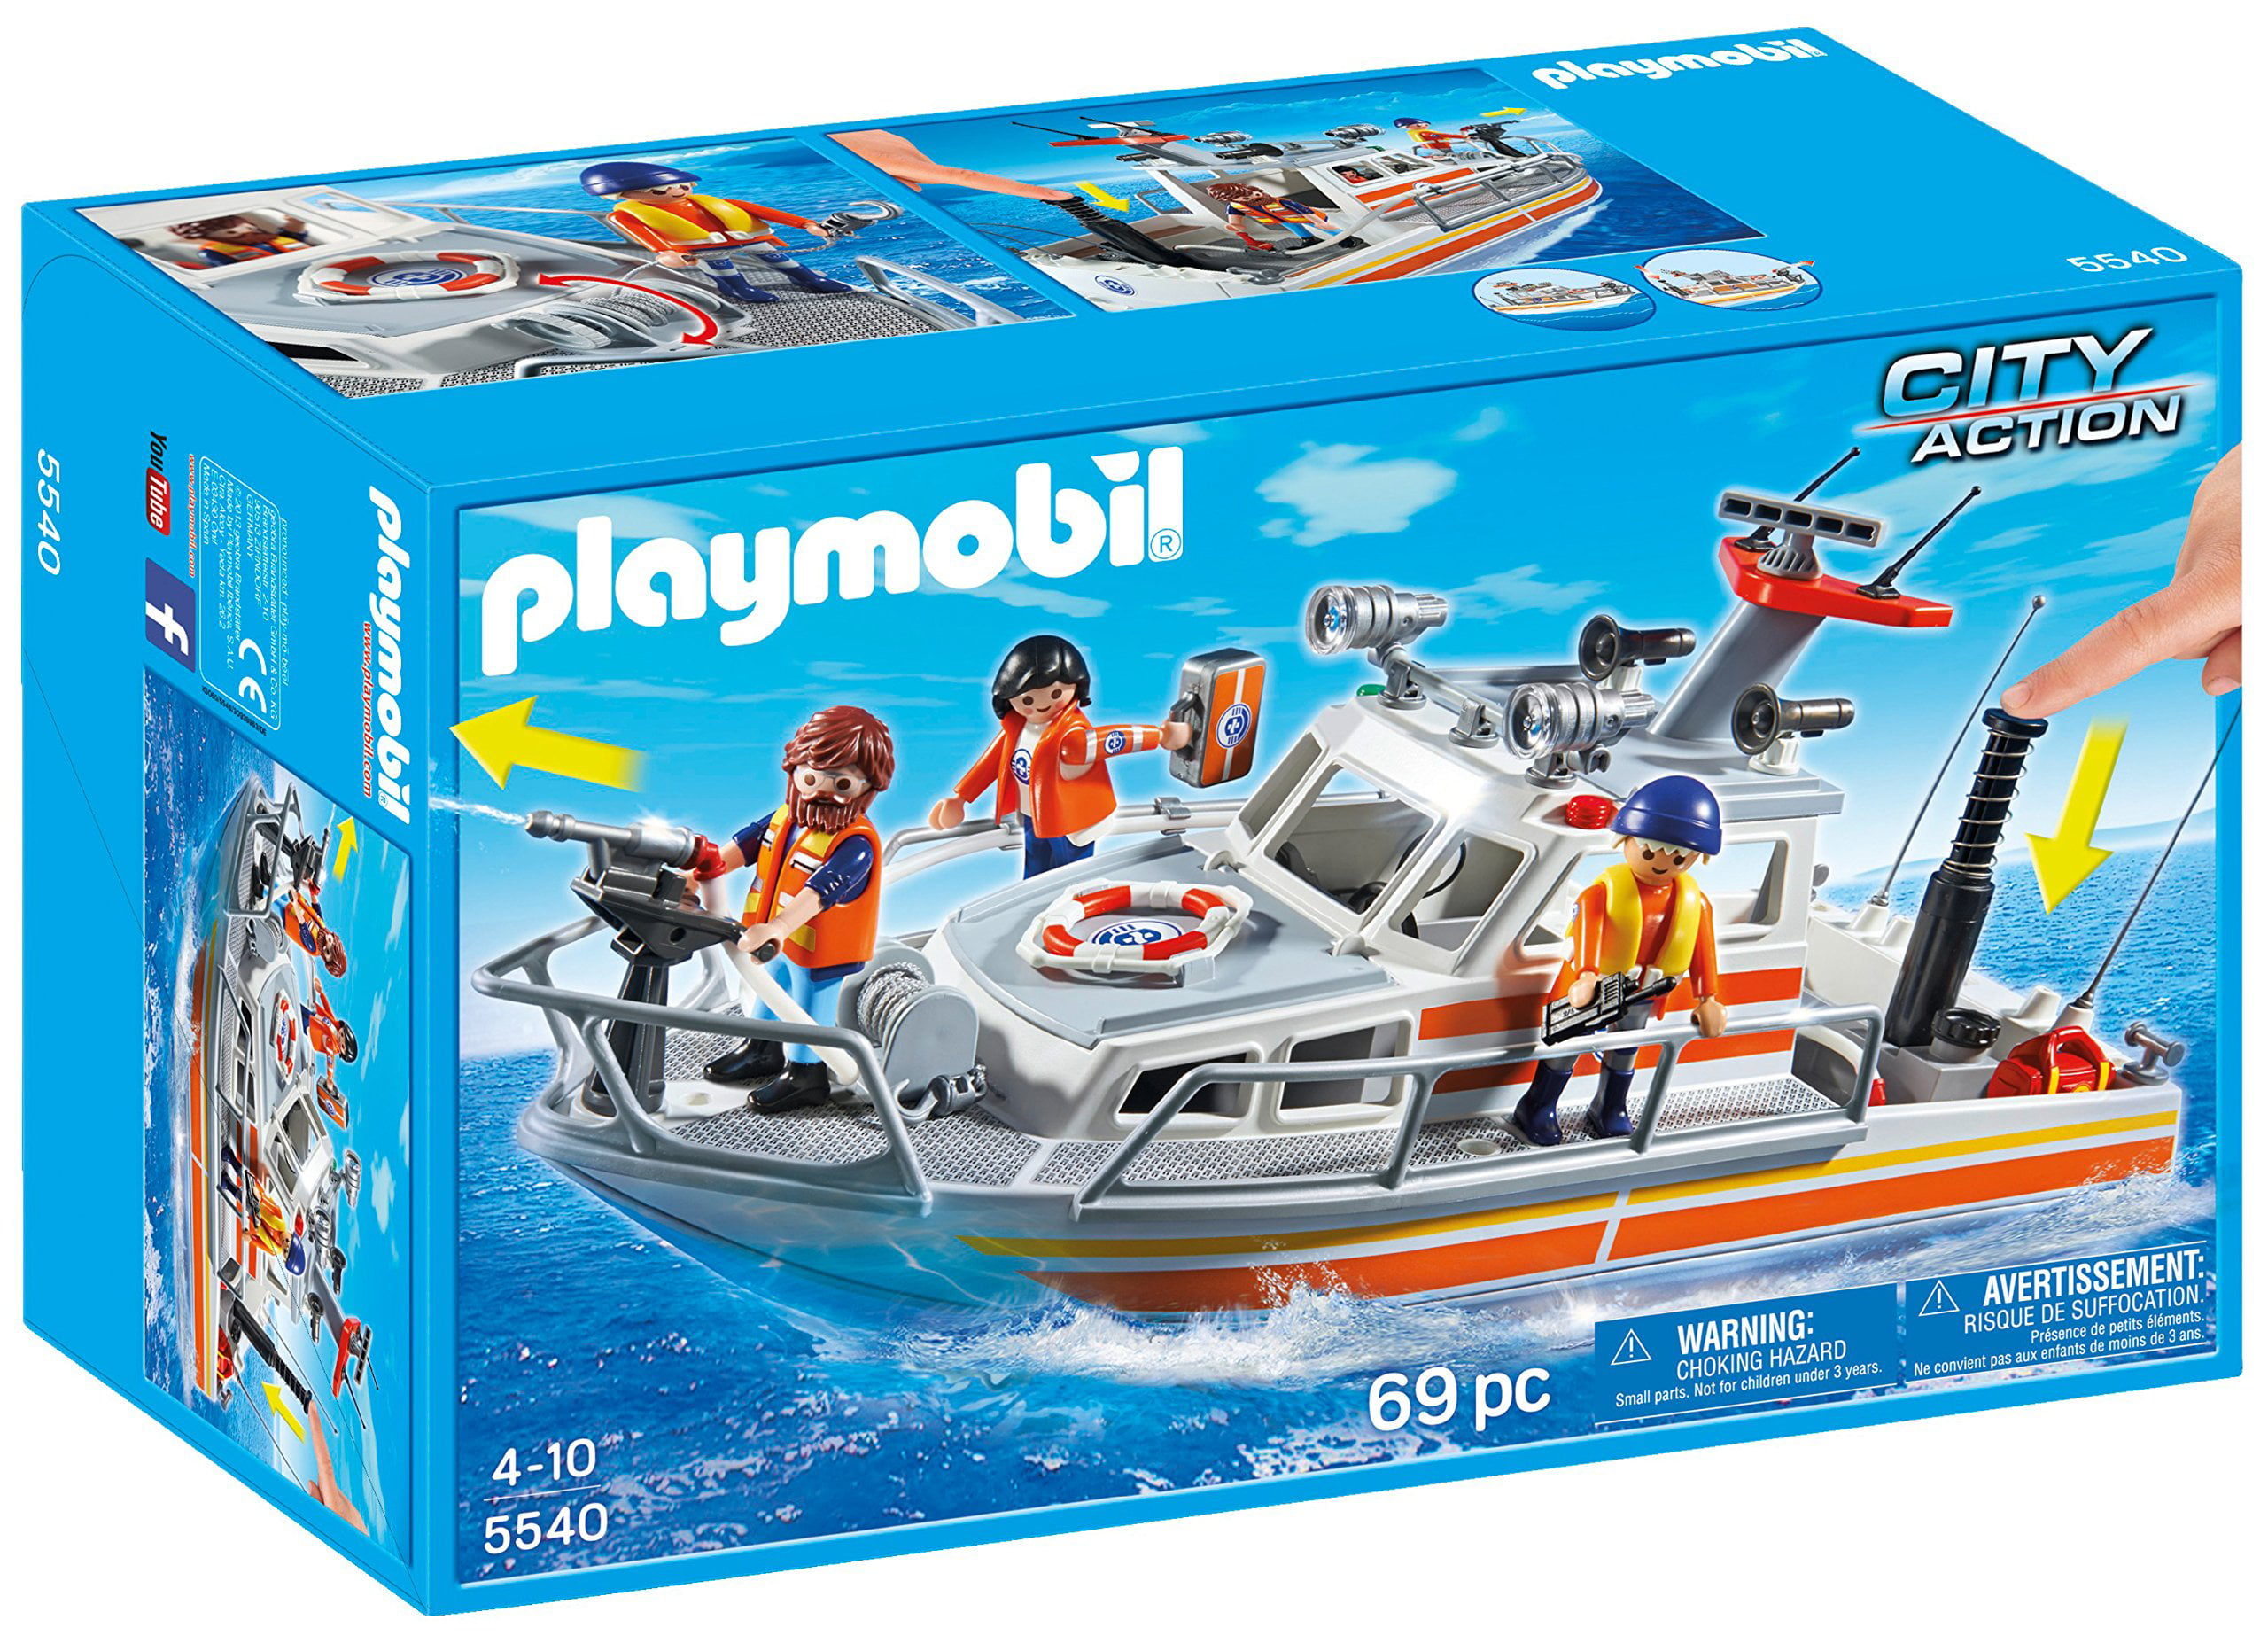 PLAYMOBIL Rescue Boat with Water Hose Play Set Walmart.com